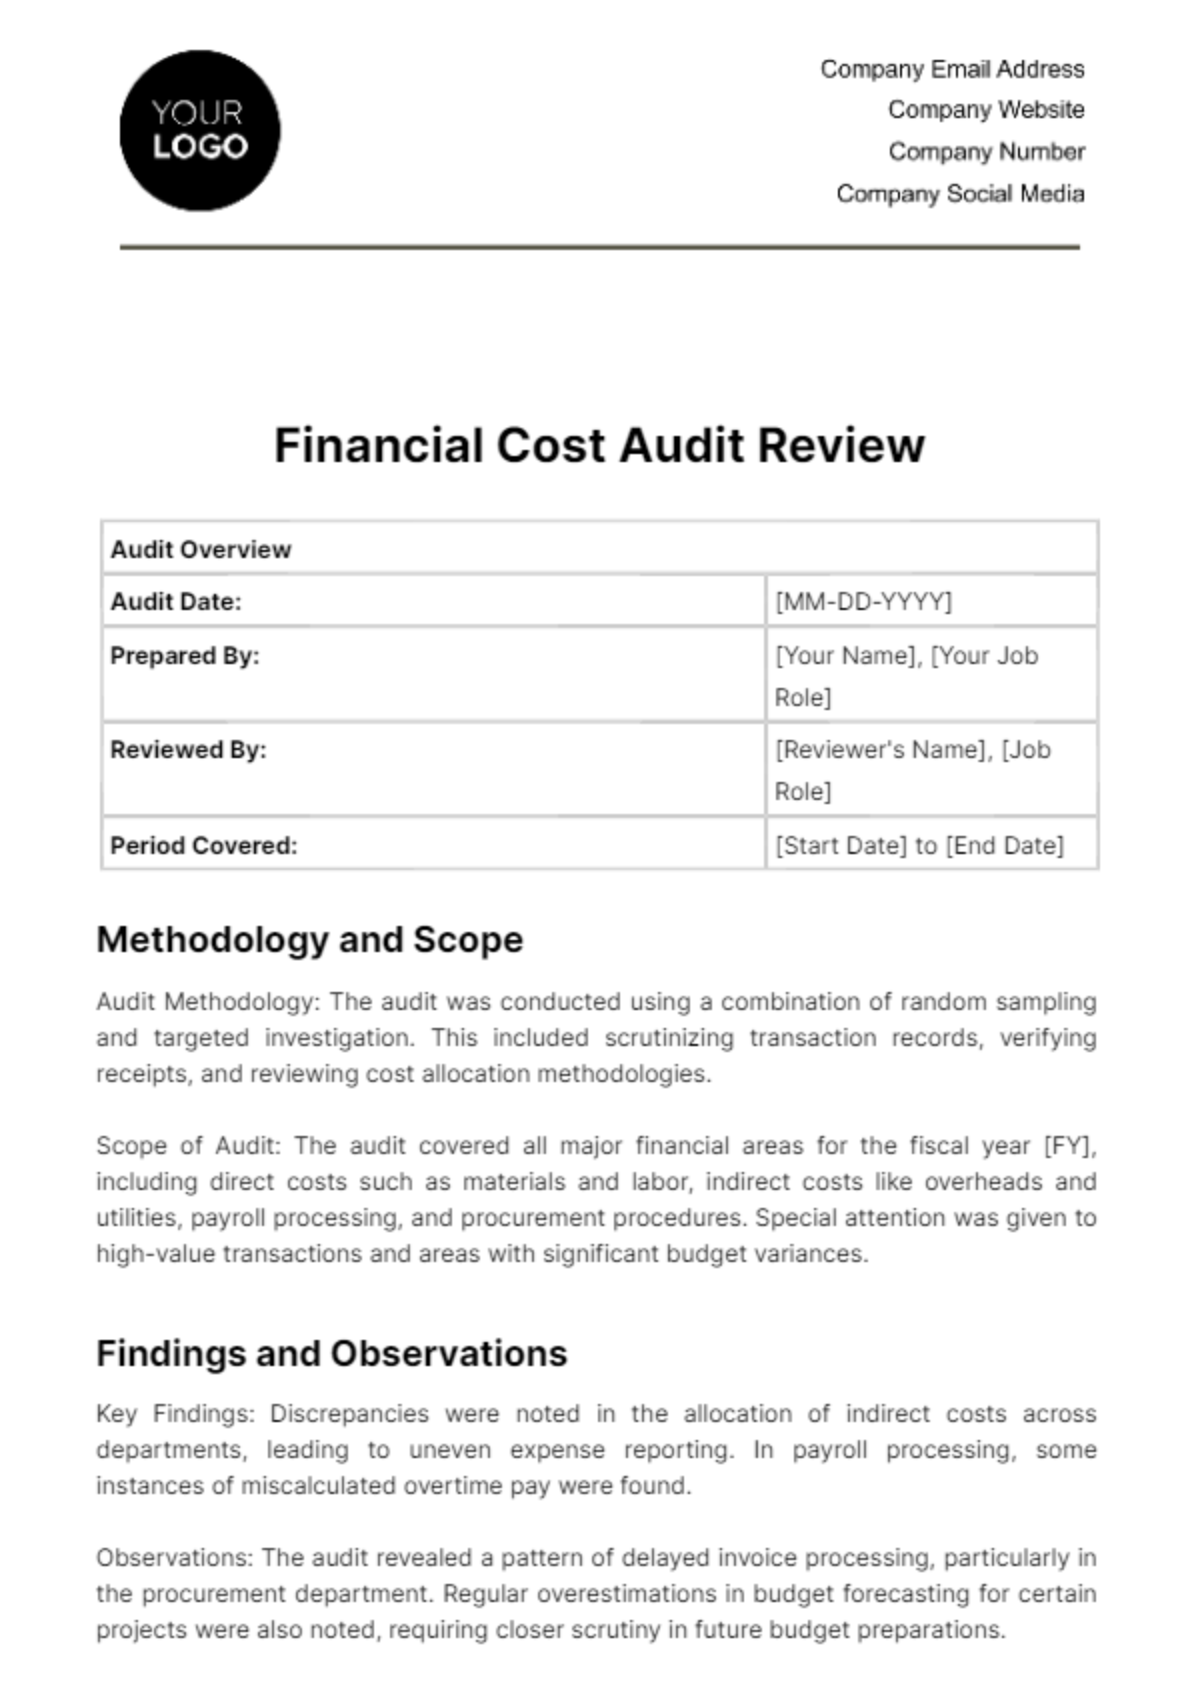 Free Financial Cost Audit Review Template